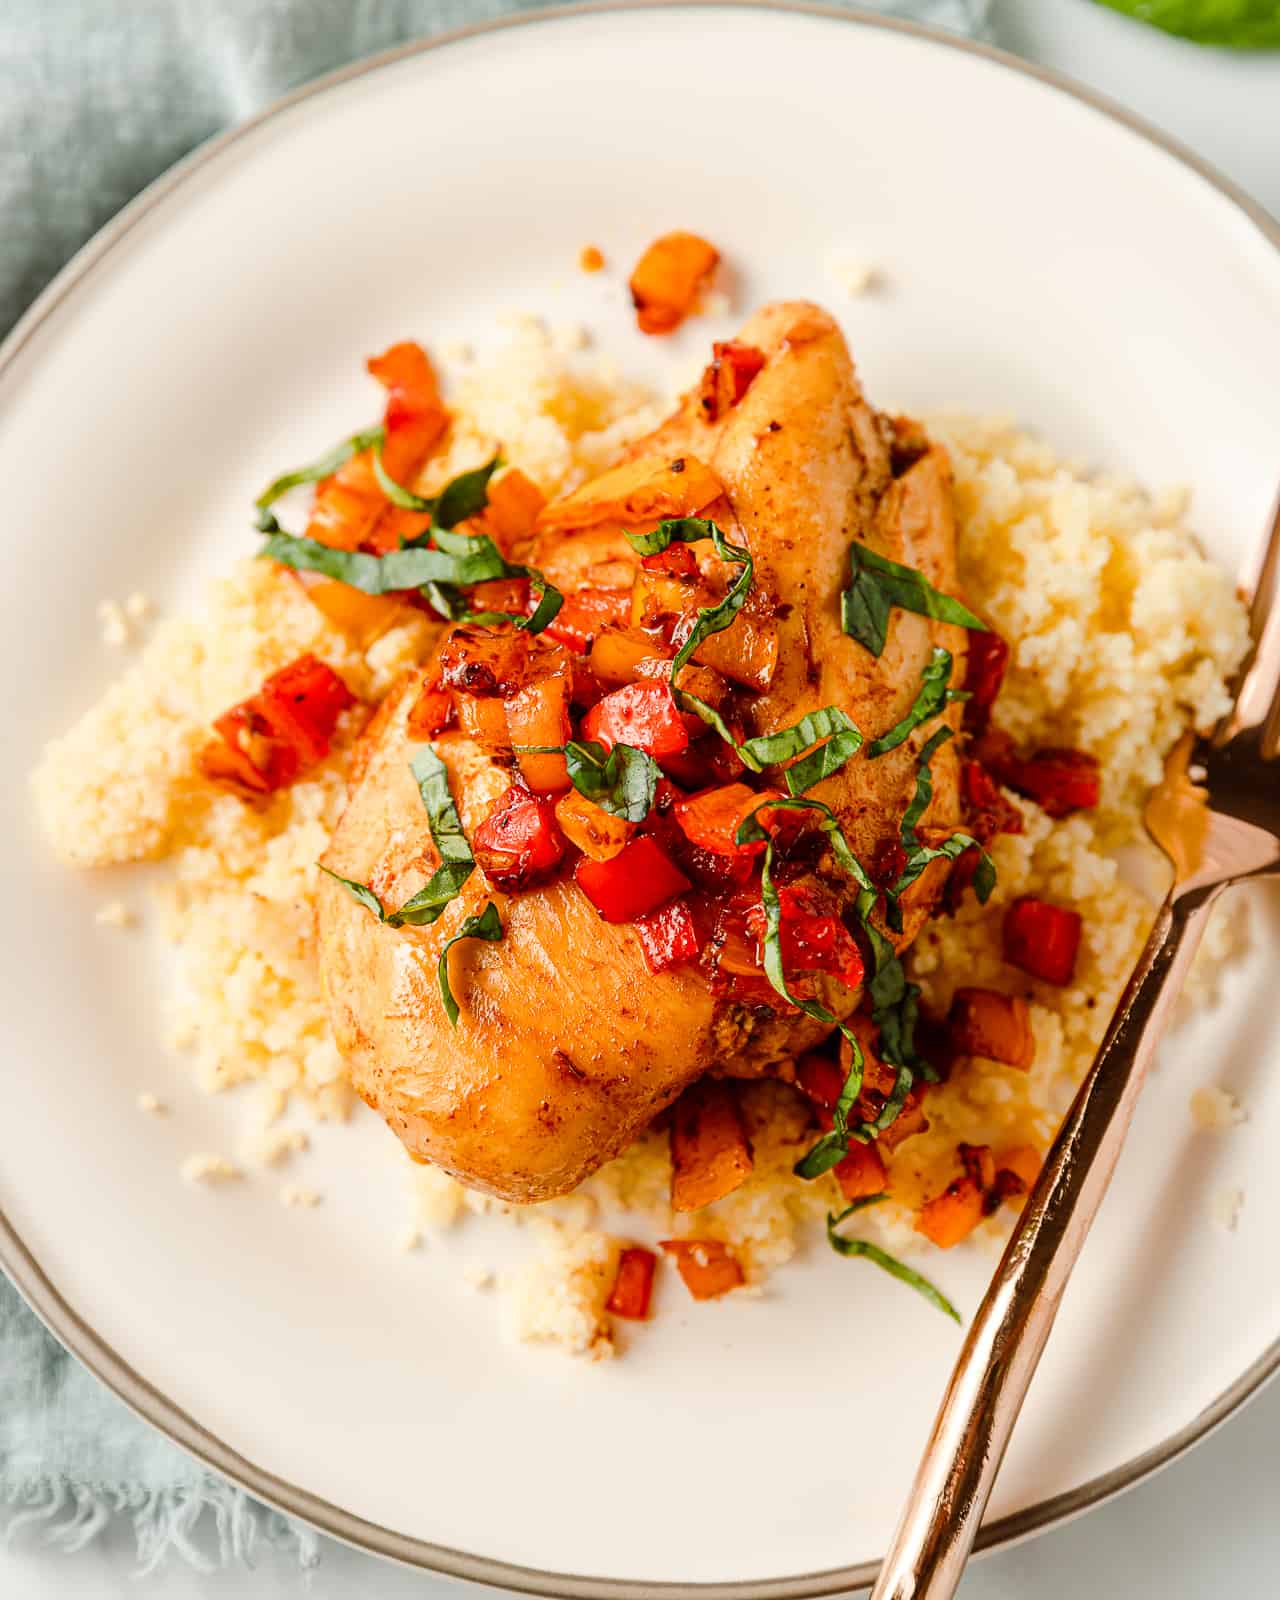 Balsamic Marinated Chicken Breast served with cooked bell pepper salsa and couscous, topped with fresh basil.